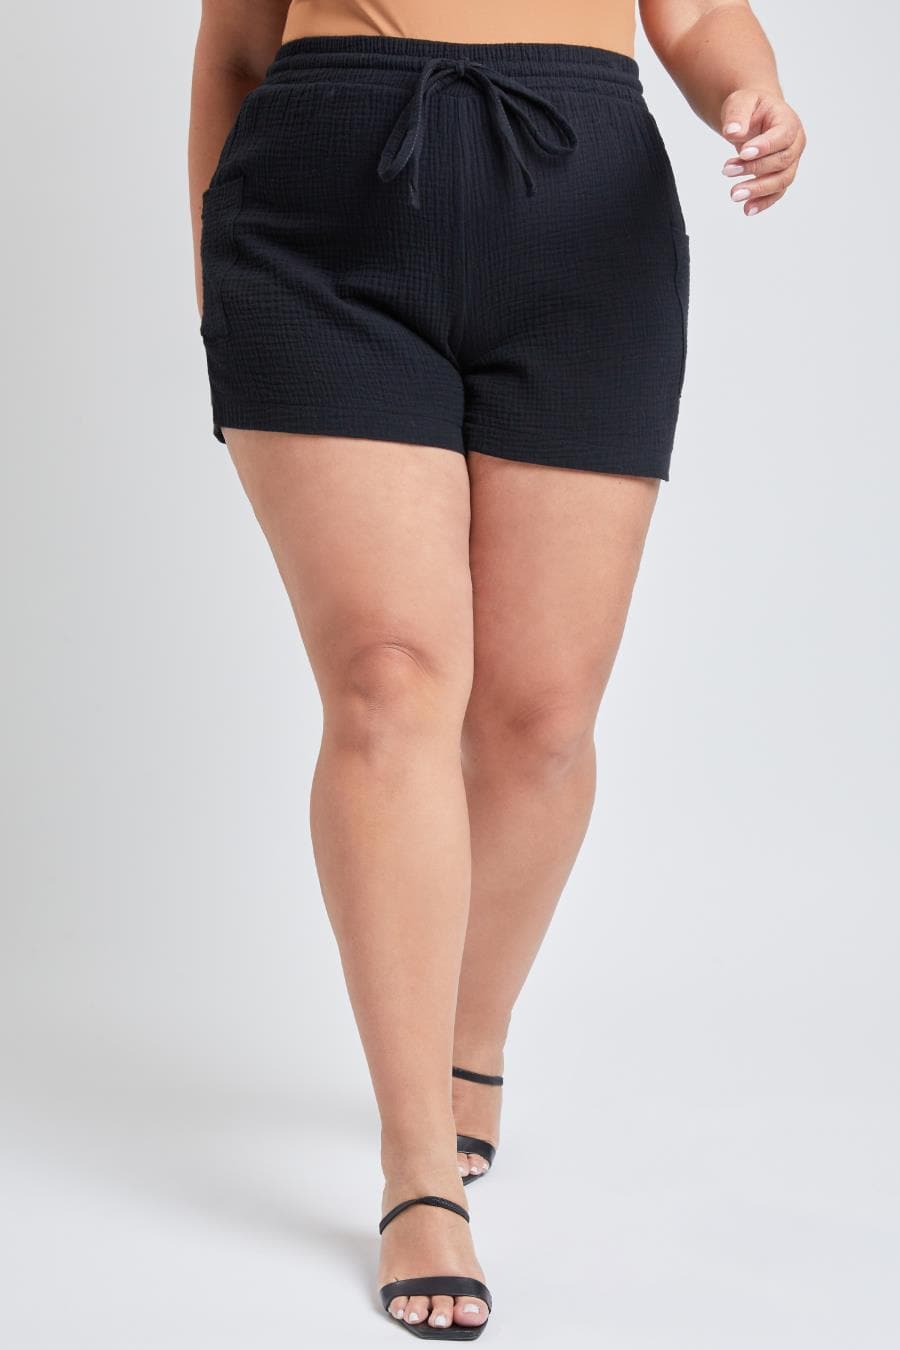 Plus Size Women's Cotton Shorts With Side Patch Pocket-Sale from 